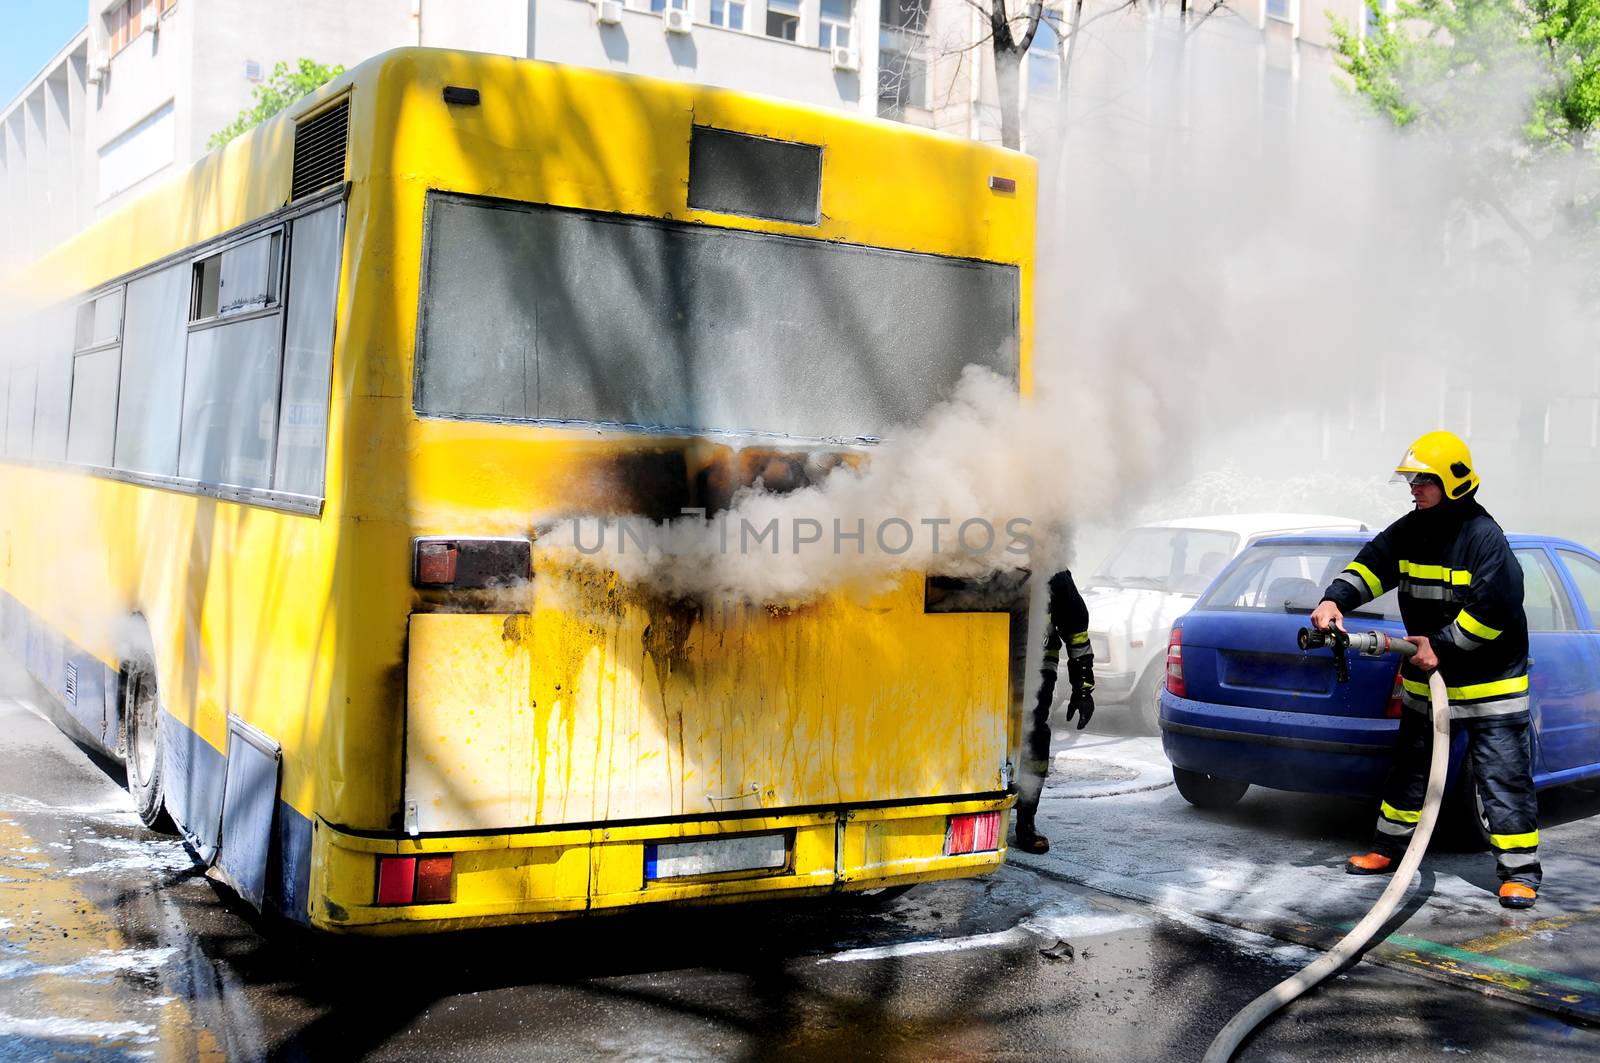 SERBIA, BELGRADE - APRIL 27, 2012: Fire fighters tries to extinguish burning bus on the street